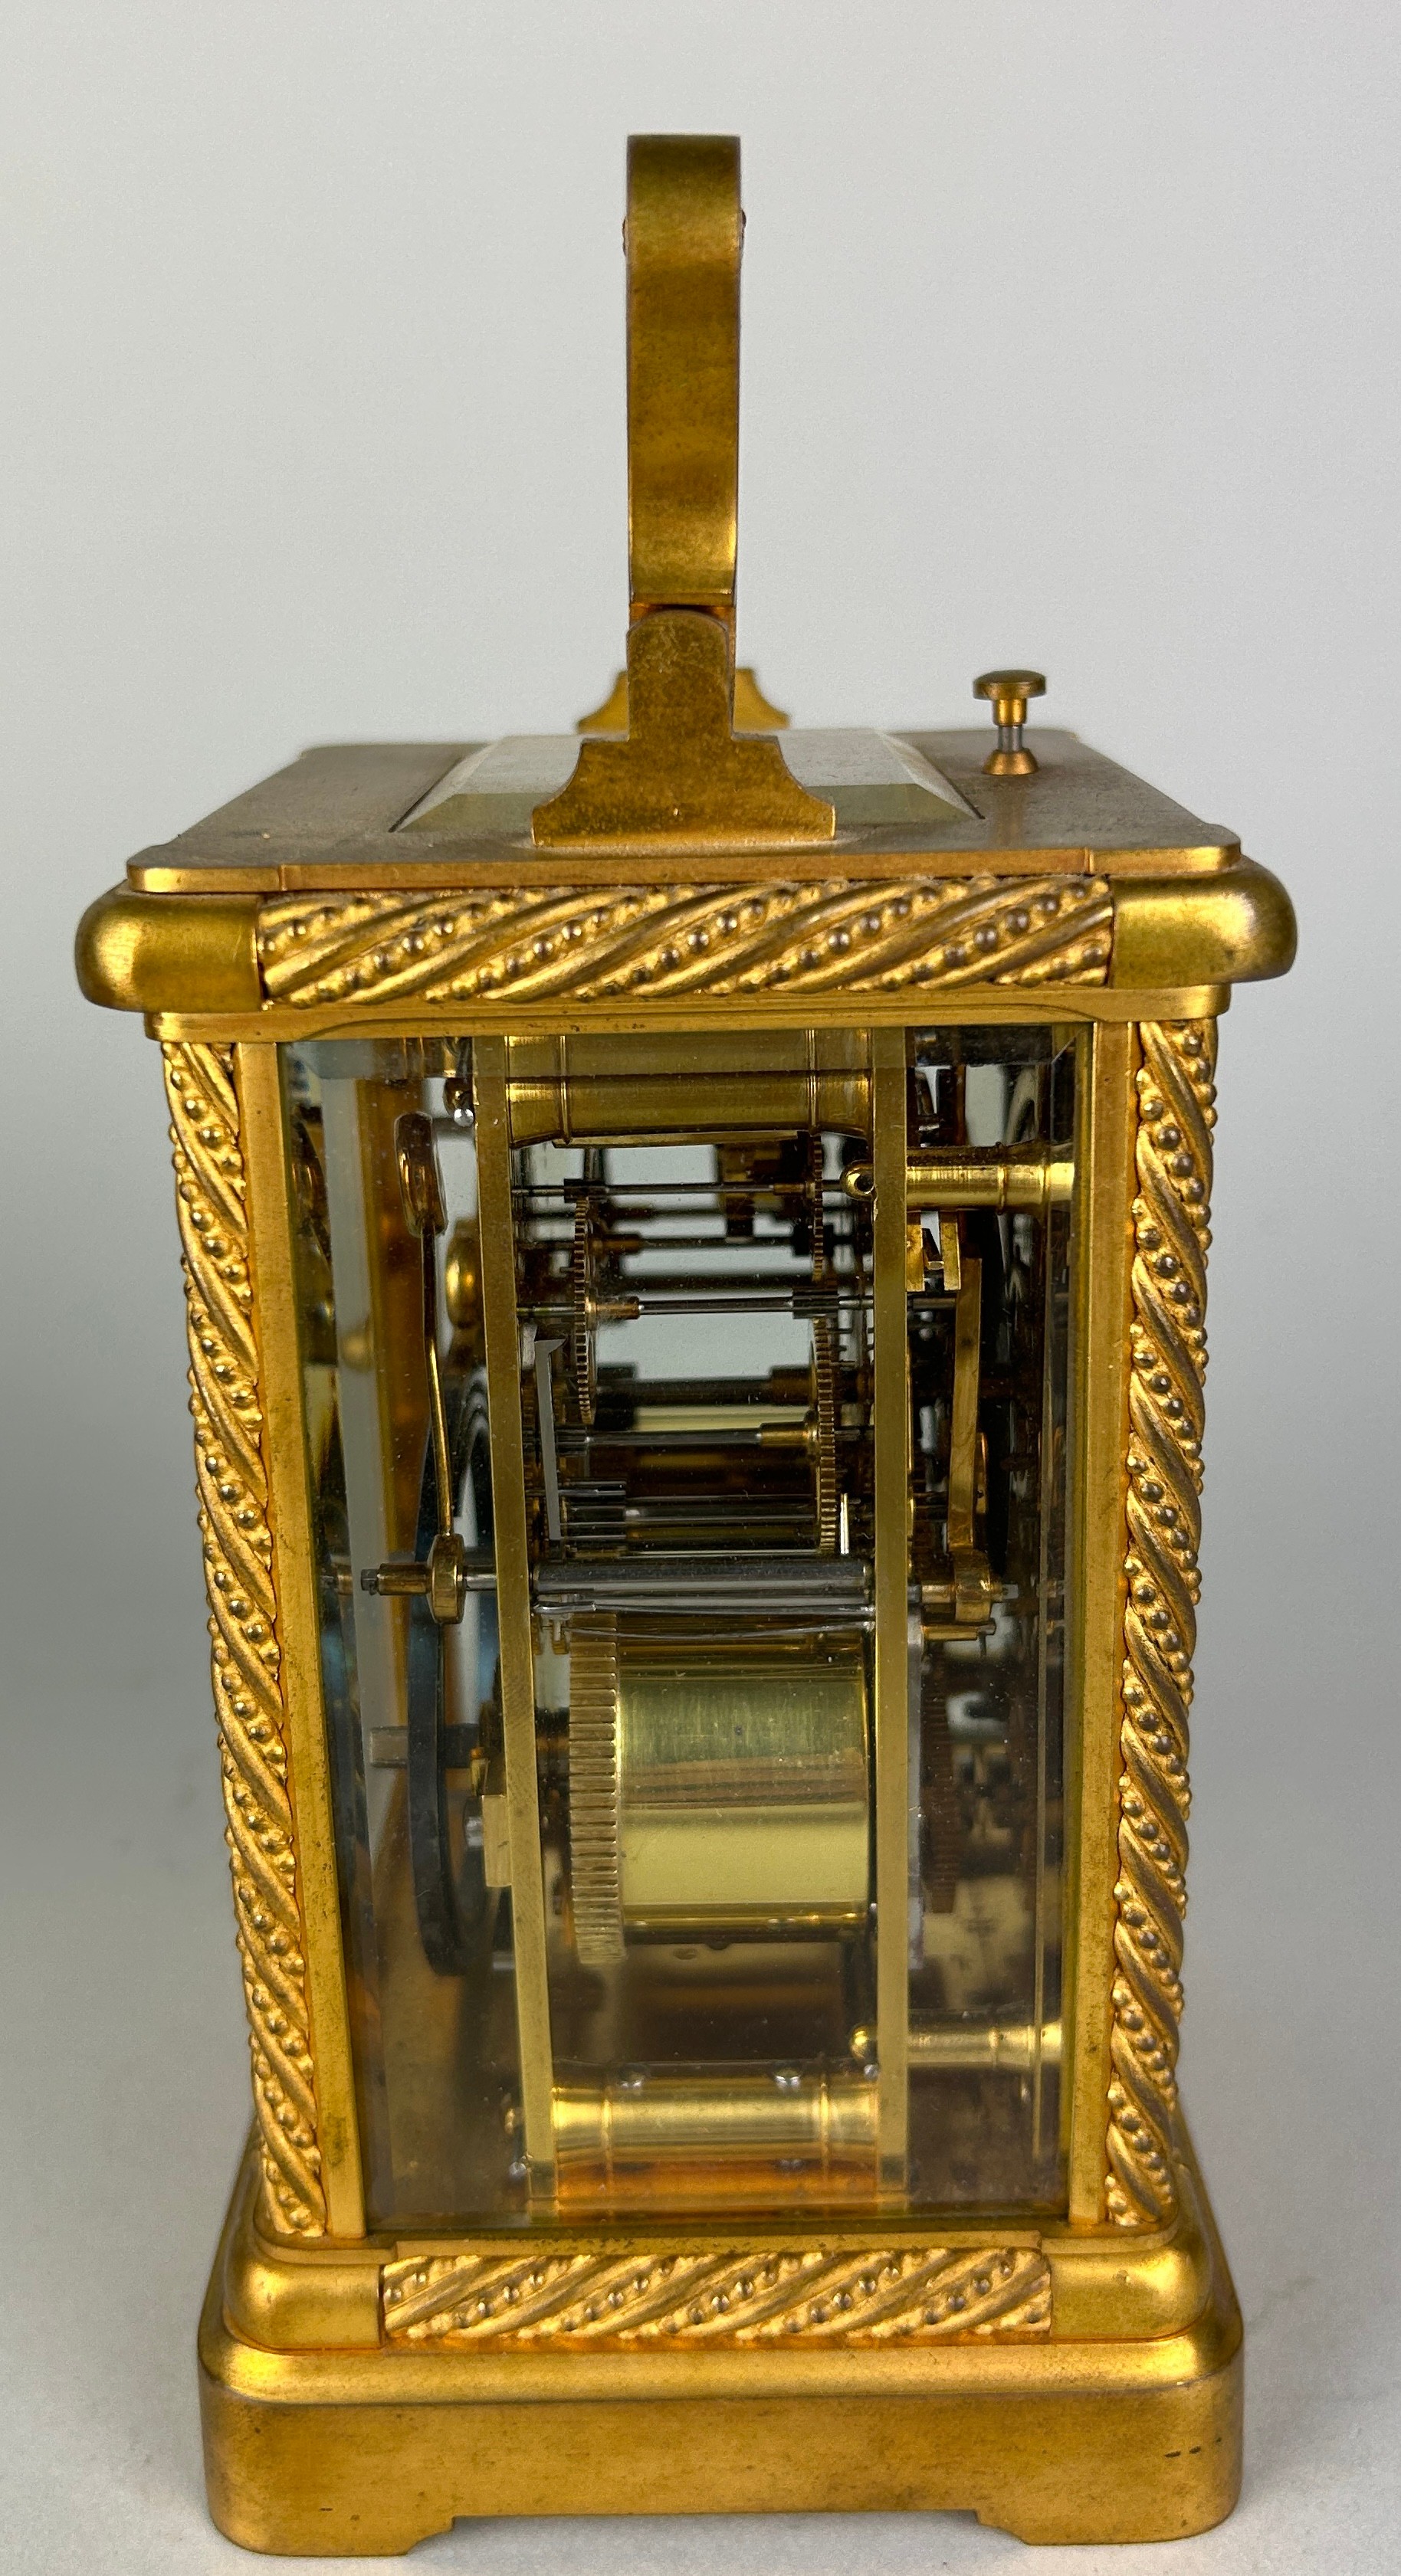 A GOOD CASED 19TH CENTURY FRENCH GILT BRONZE REPEATER CARRIAGE CLOCK WITH ALARM In working order. - Image 5 of 7